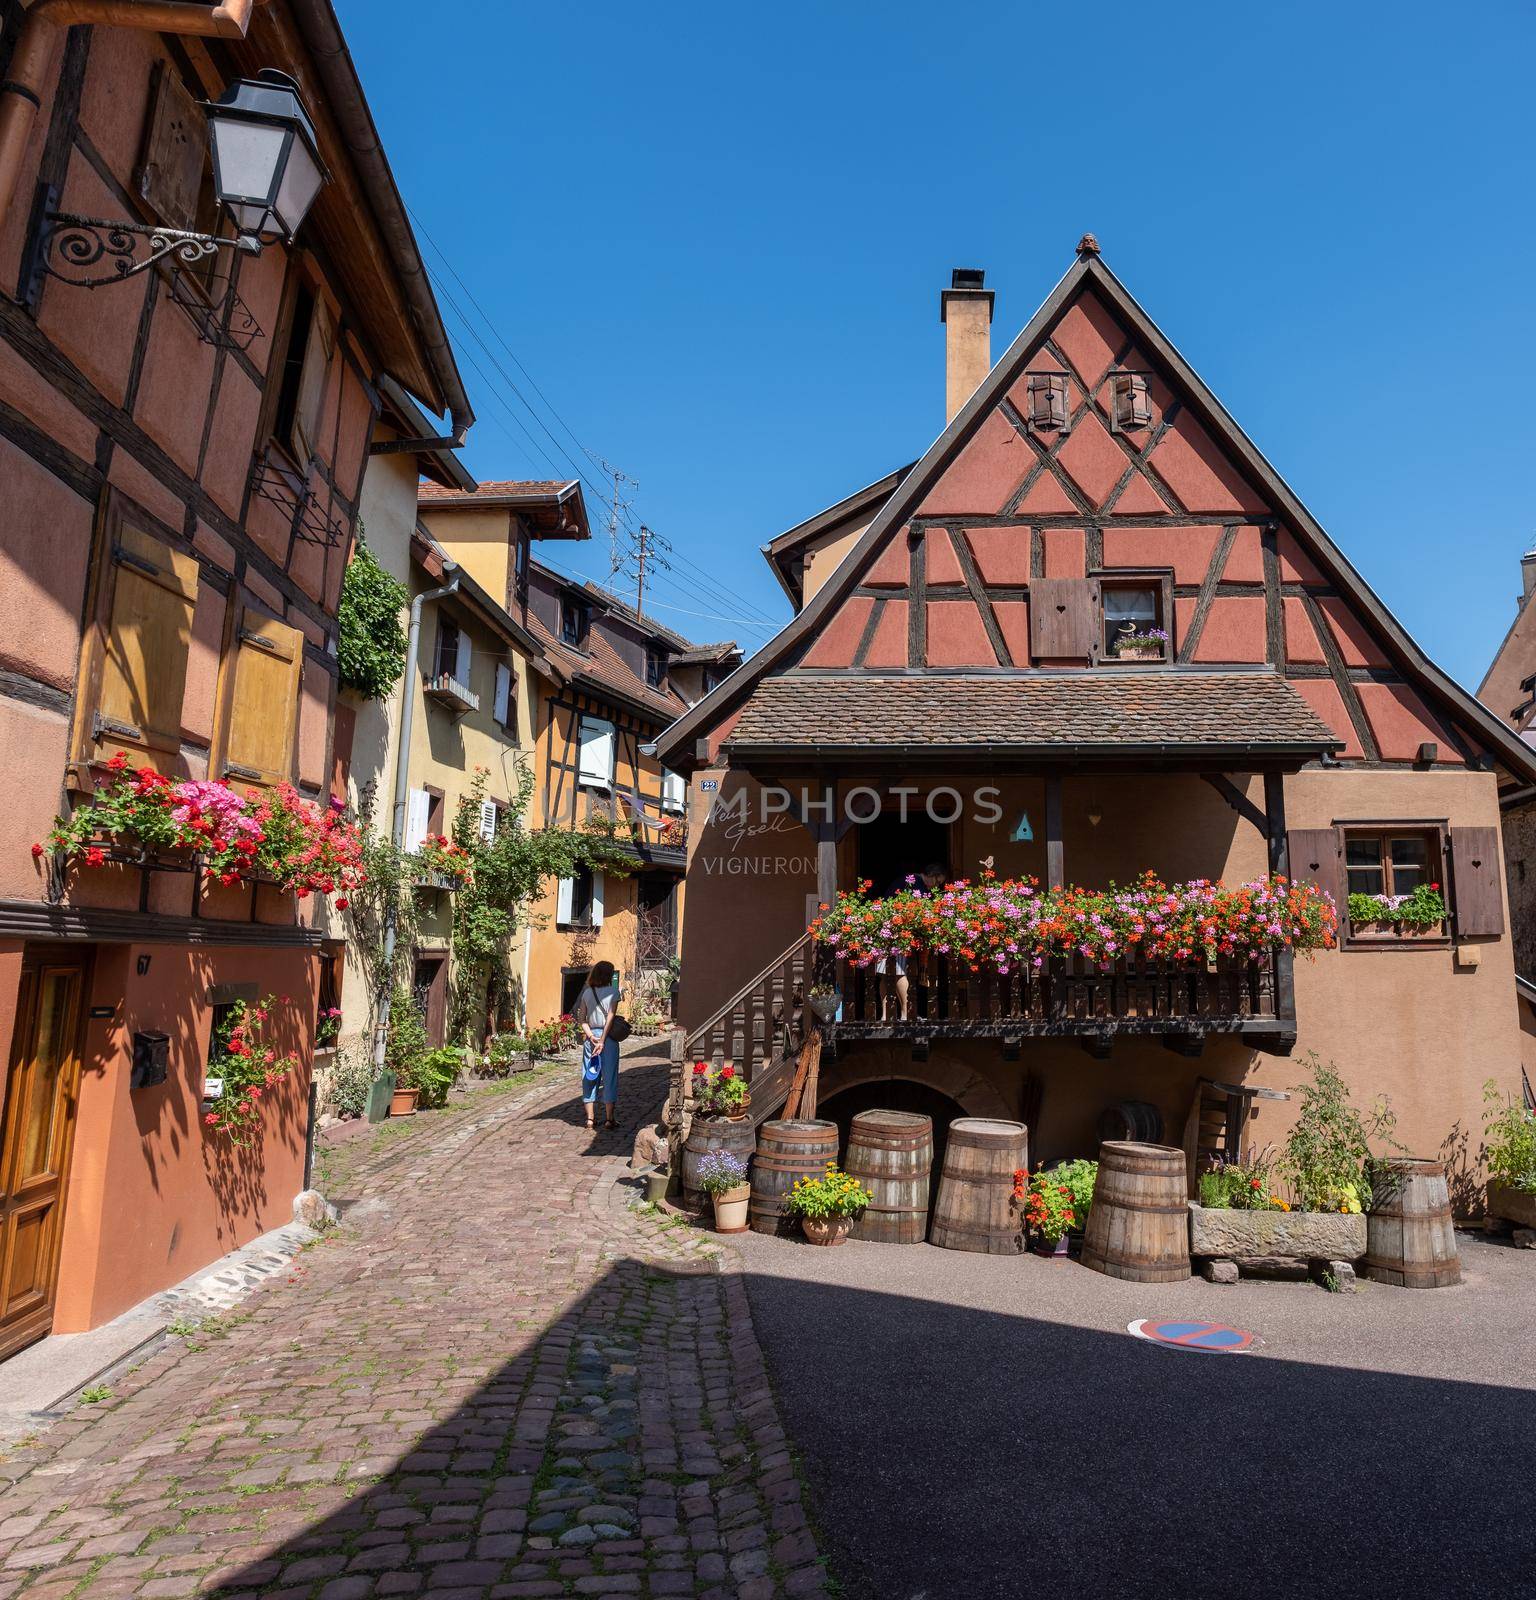 Eguisheim, Alsace, France July 2021, Traditional colorful halt-timbered houses in Eguisheim Old Town on Alsace Wine Route, France.colorful streets old town